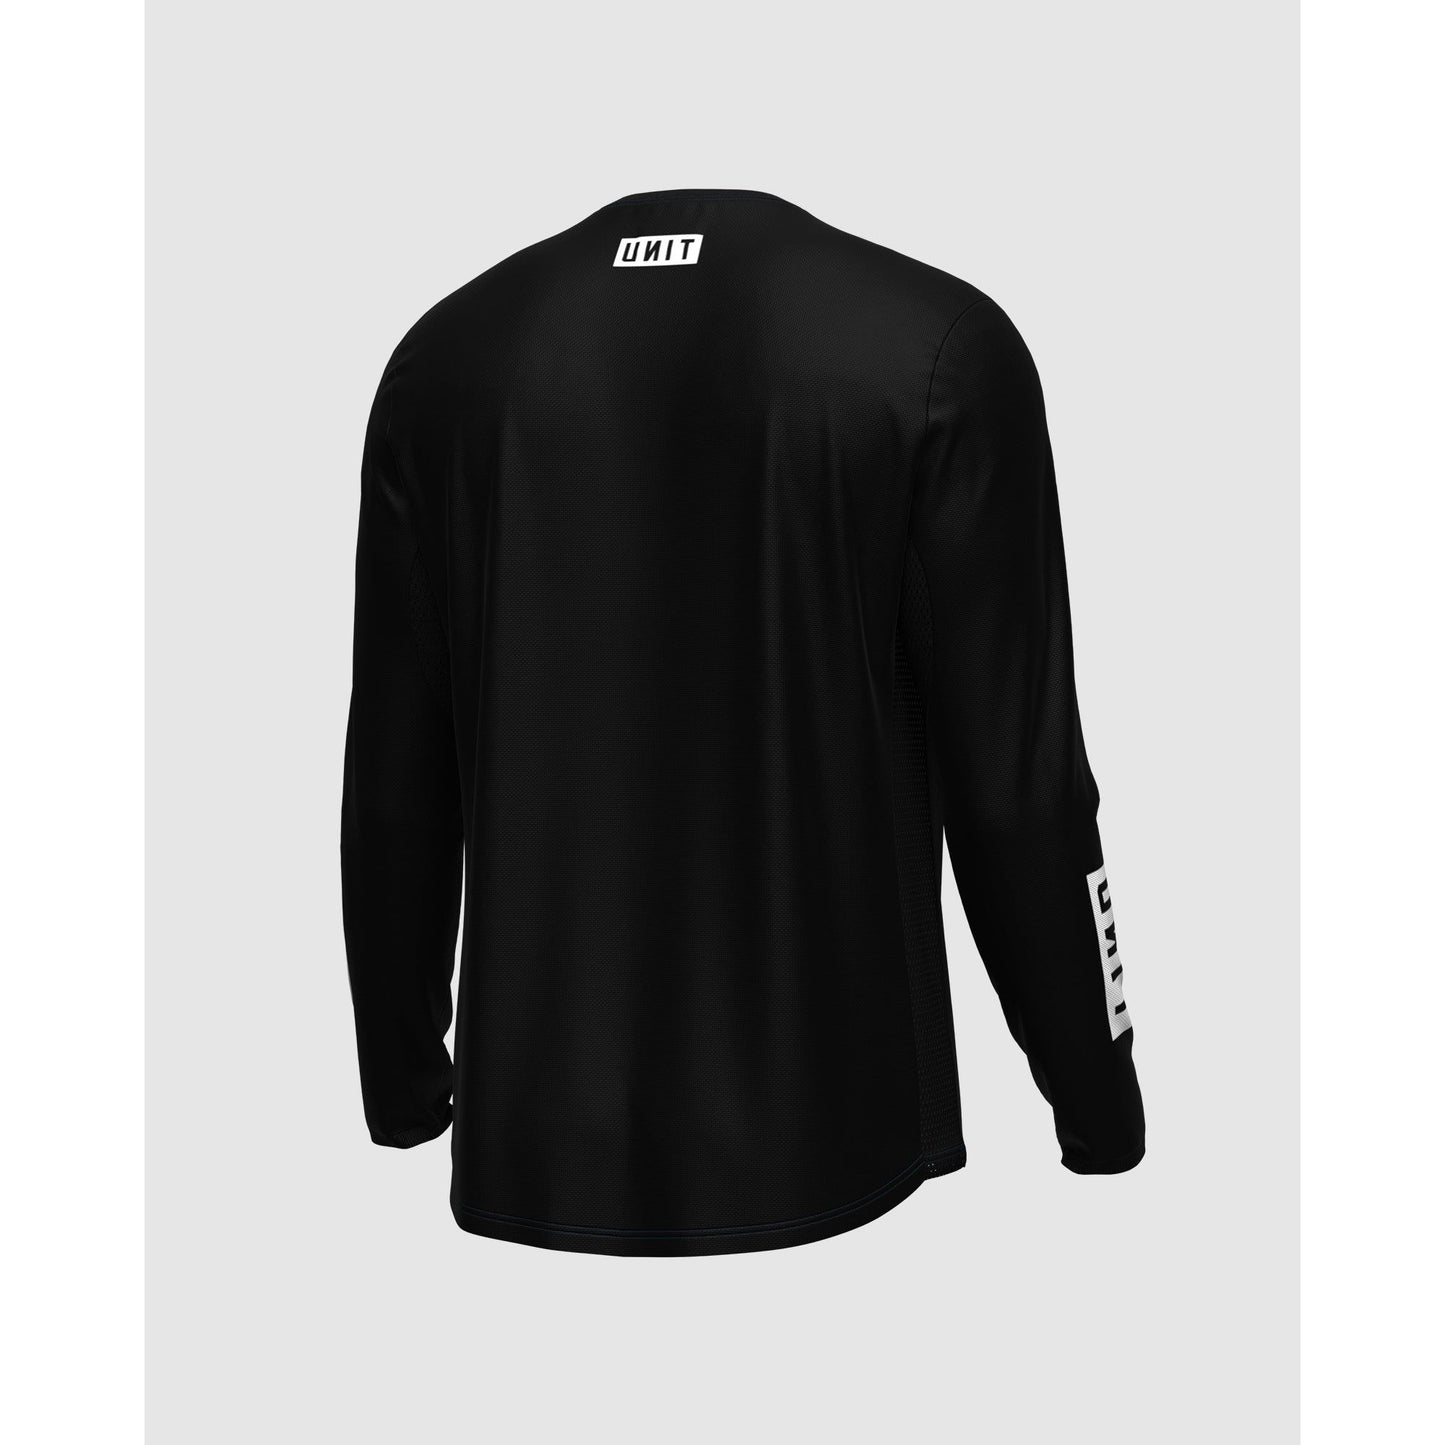 Unit Youth Long Sleeve Jersey - Youth S - Stack - Image 2